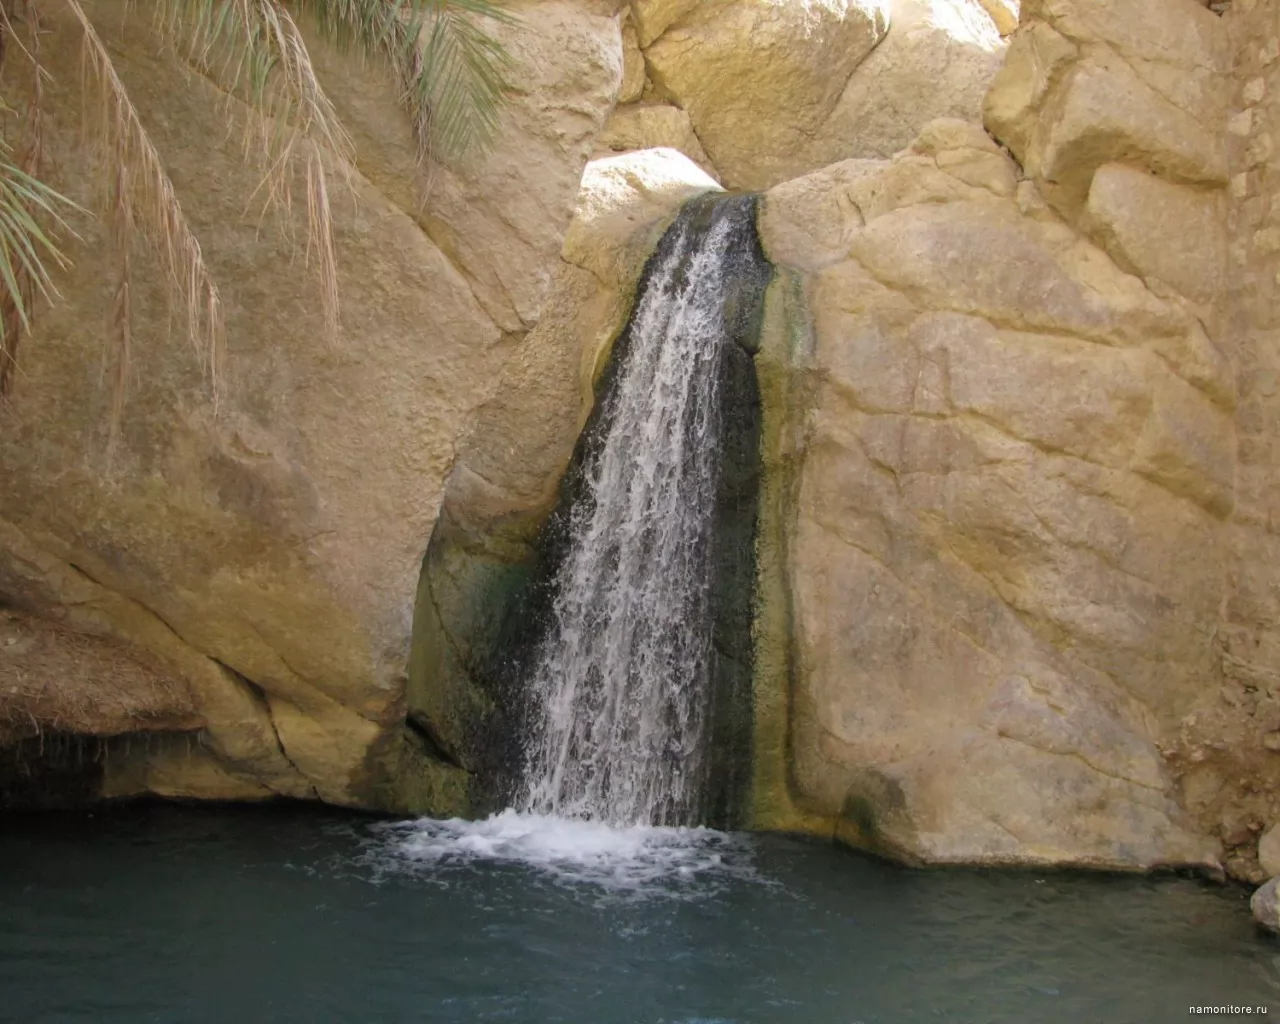 Falls in an oasis, Africa, brown, falls, nature x